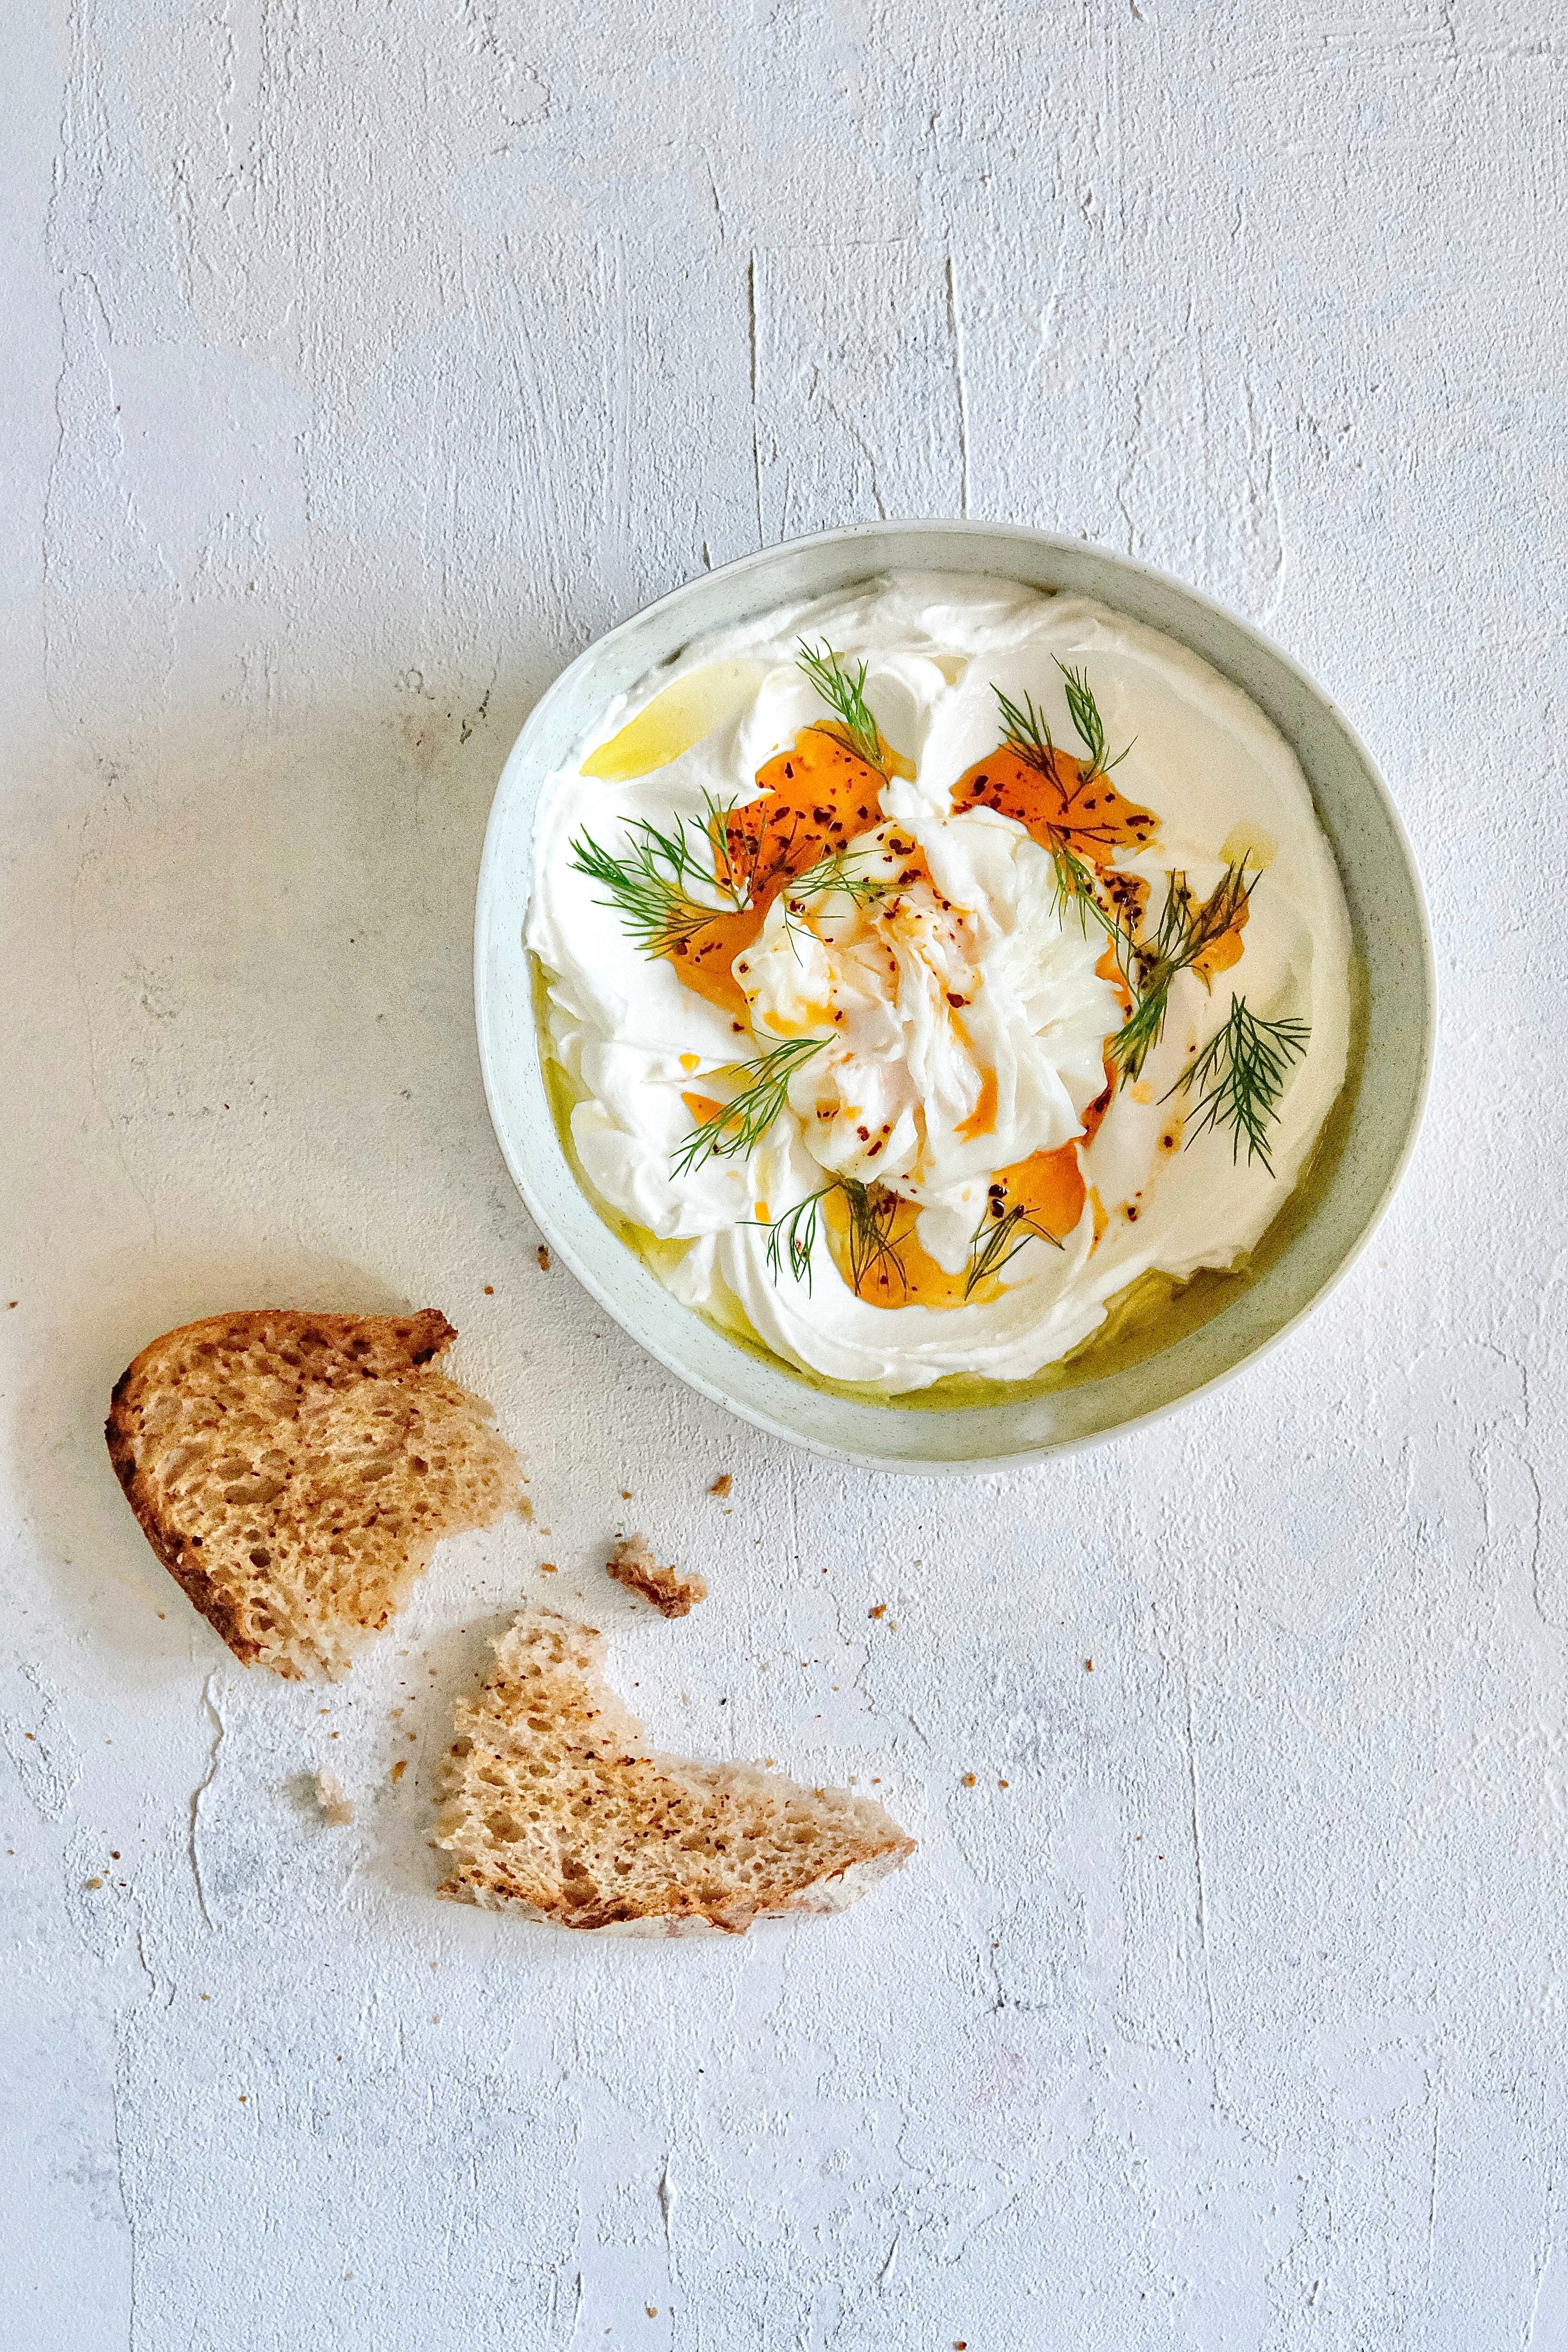 A bowl of a yogurt-dip with pieces of fresh dill, spices and oil visible on the surface. Next to the bowl is a small piece of toasted brown bread, broken in half.